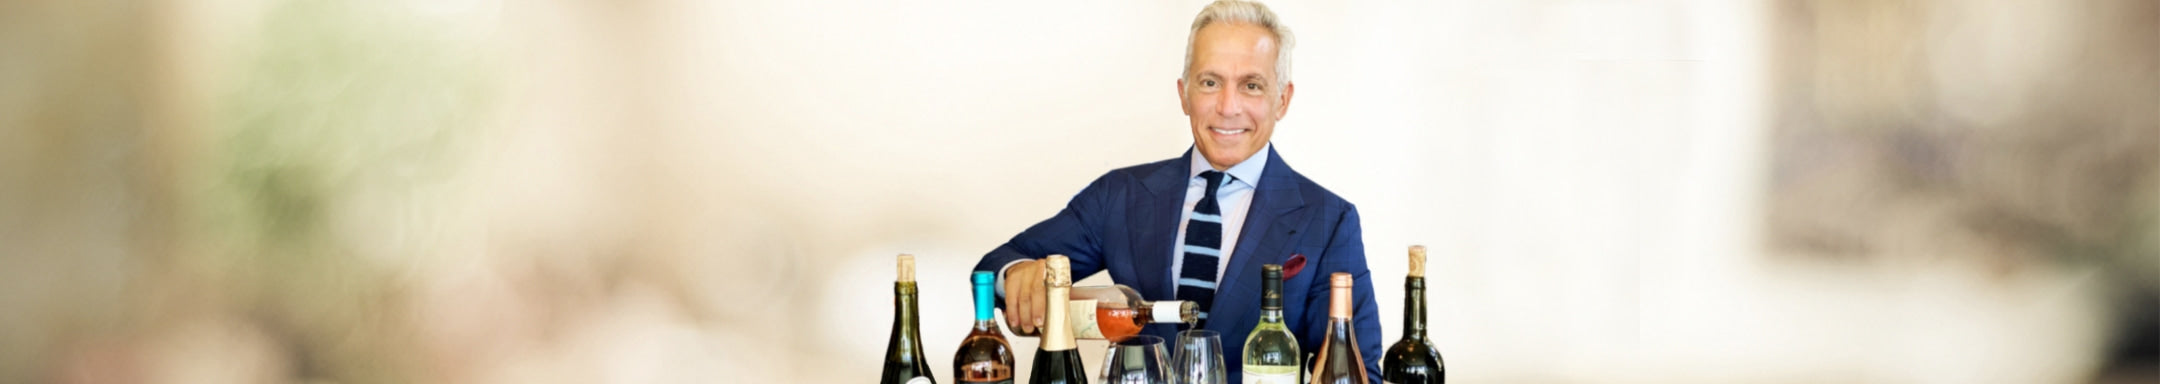 Iron Chef Geoffrey Zakarian knows great wine, and he’s selected the perfect bottles to accompany meals and be enjoyed around the table.